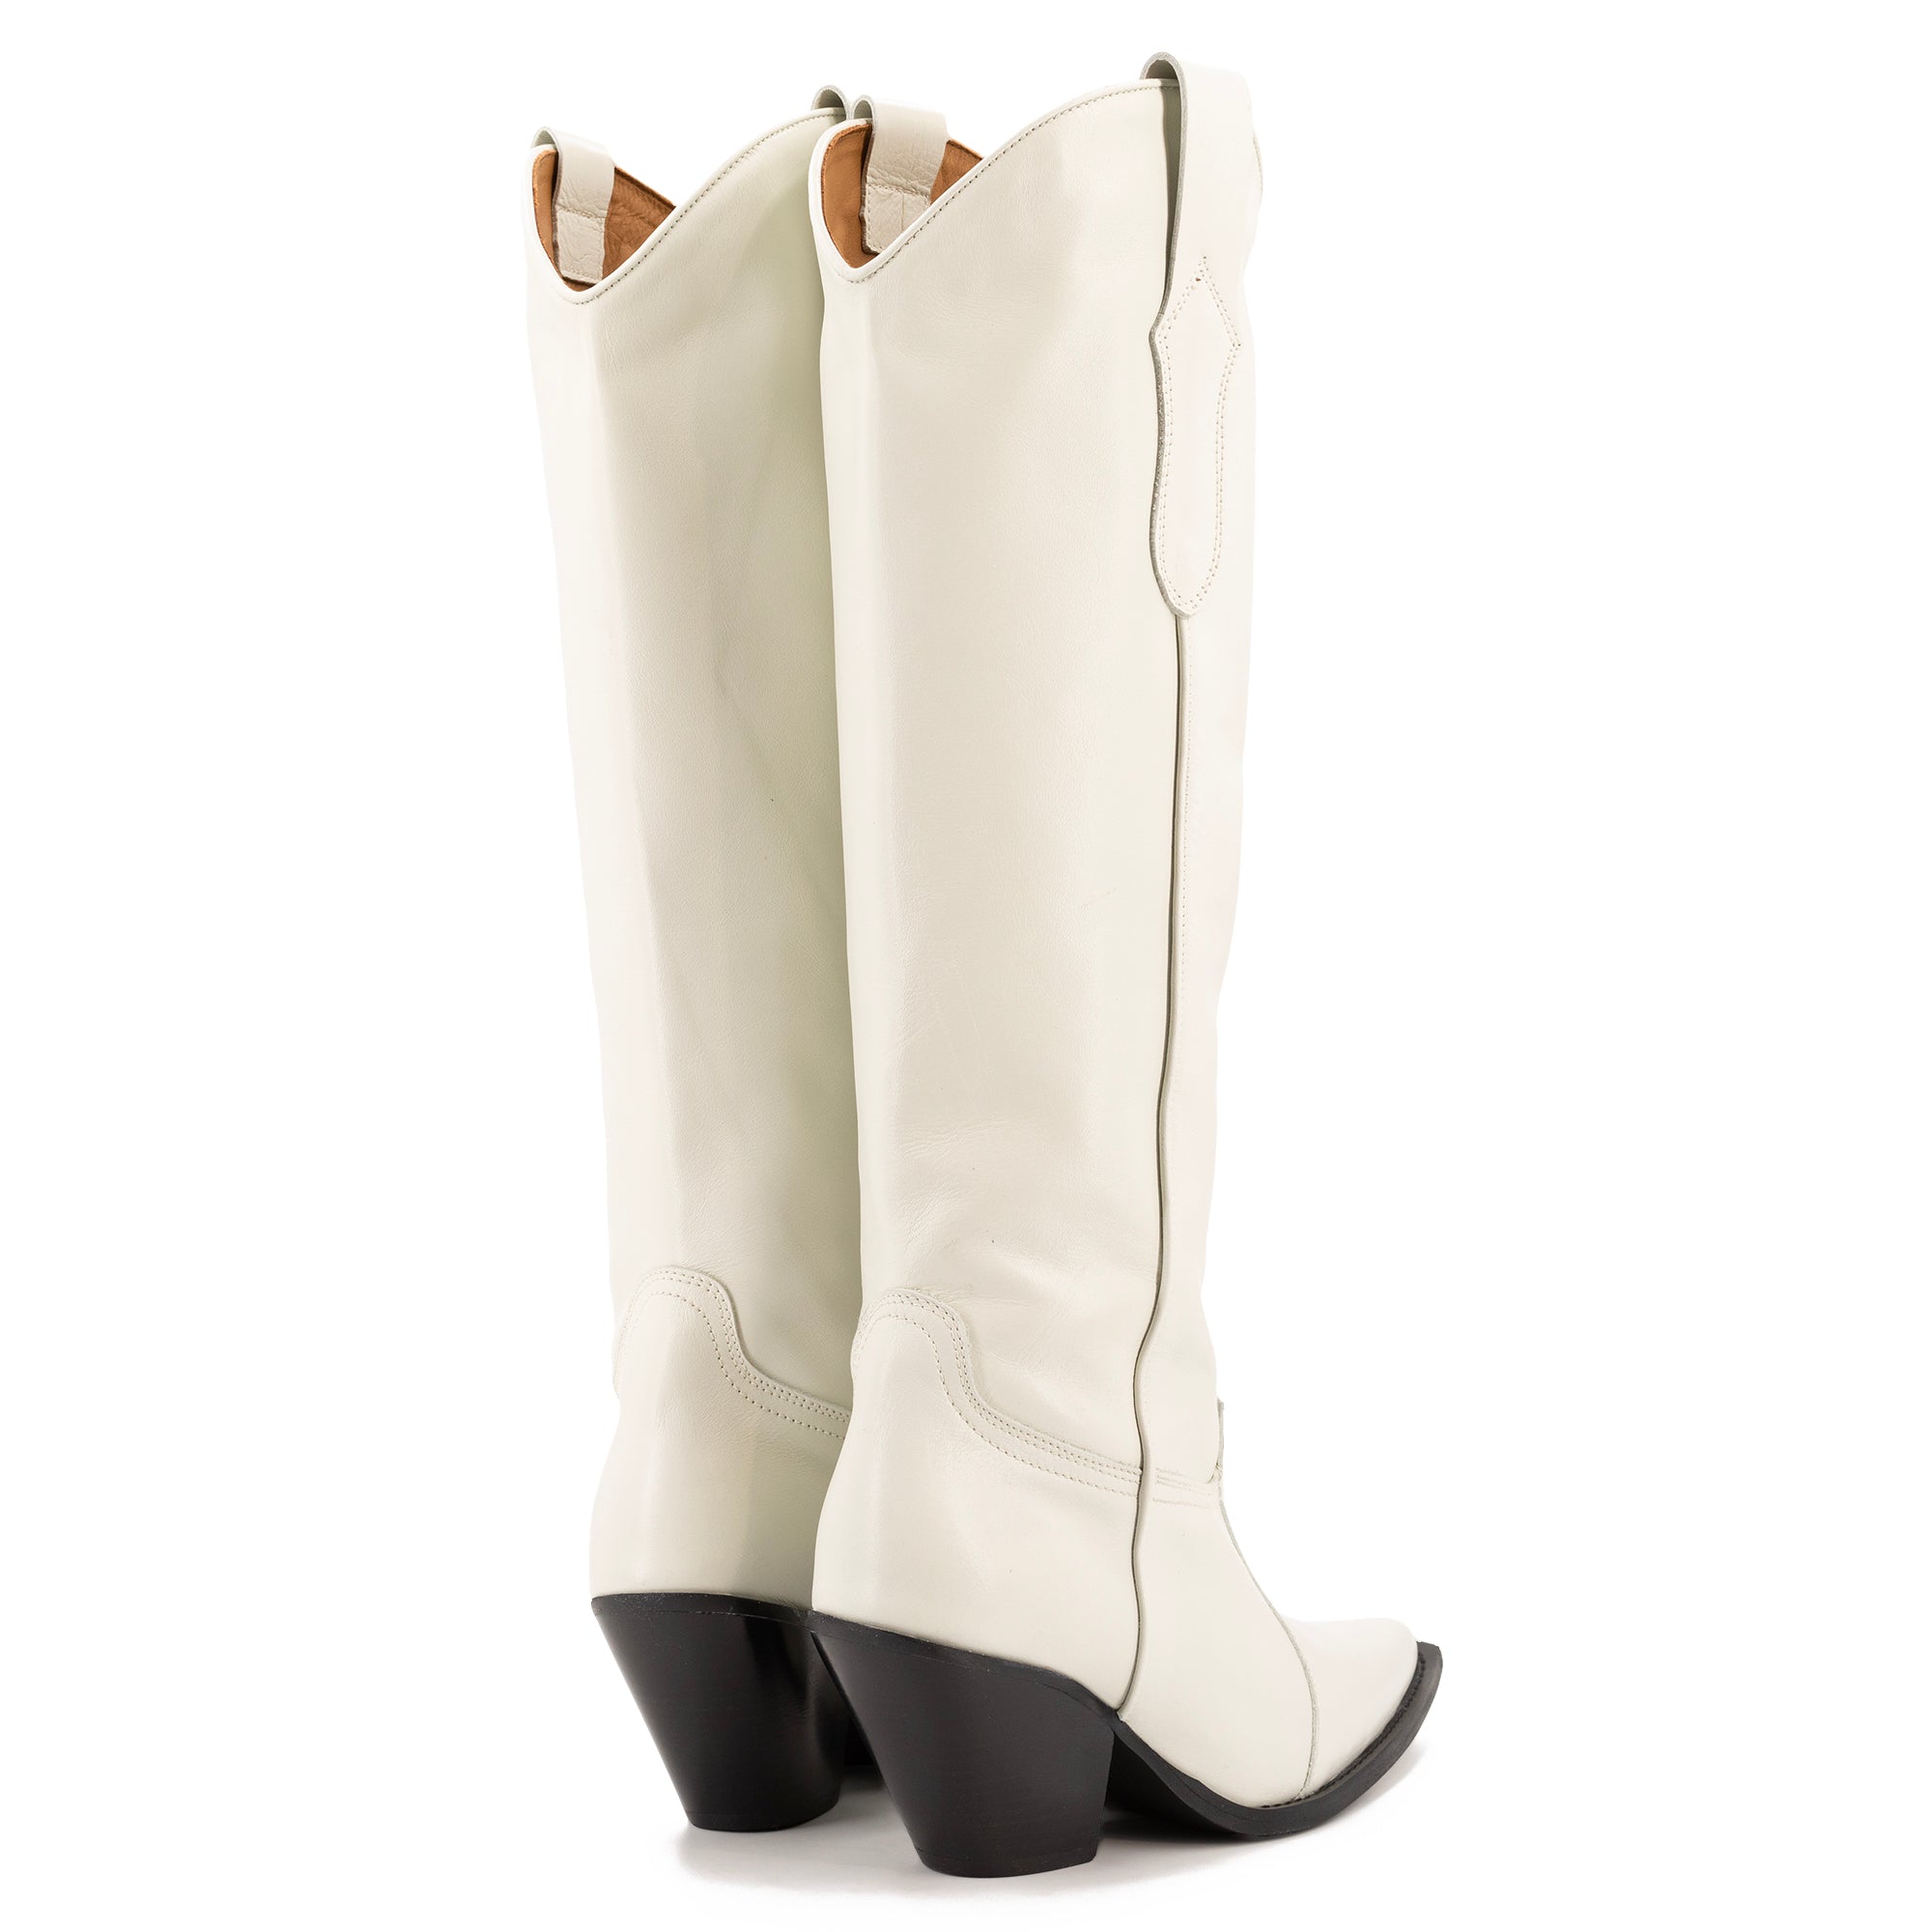 TORAL OFF-WHITE LEATHER KNEE-HIGH BOOTS